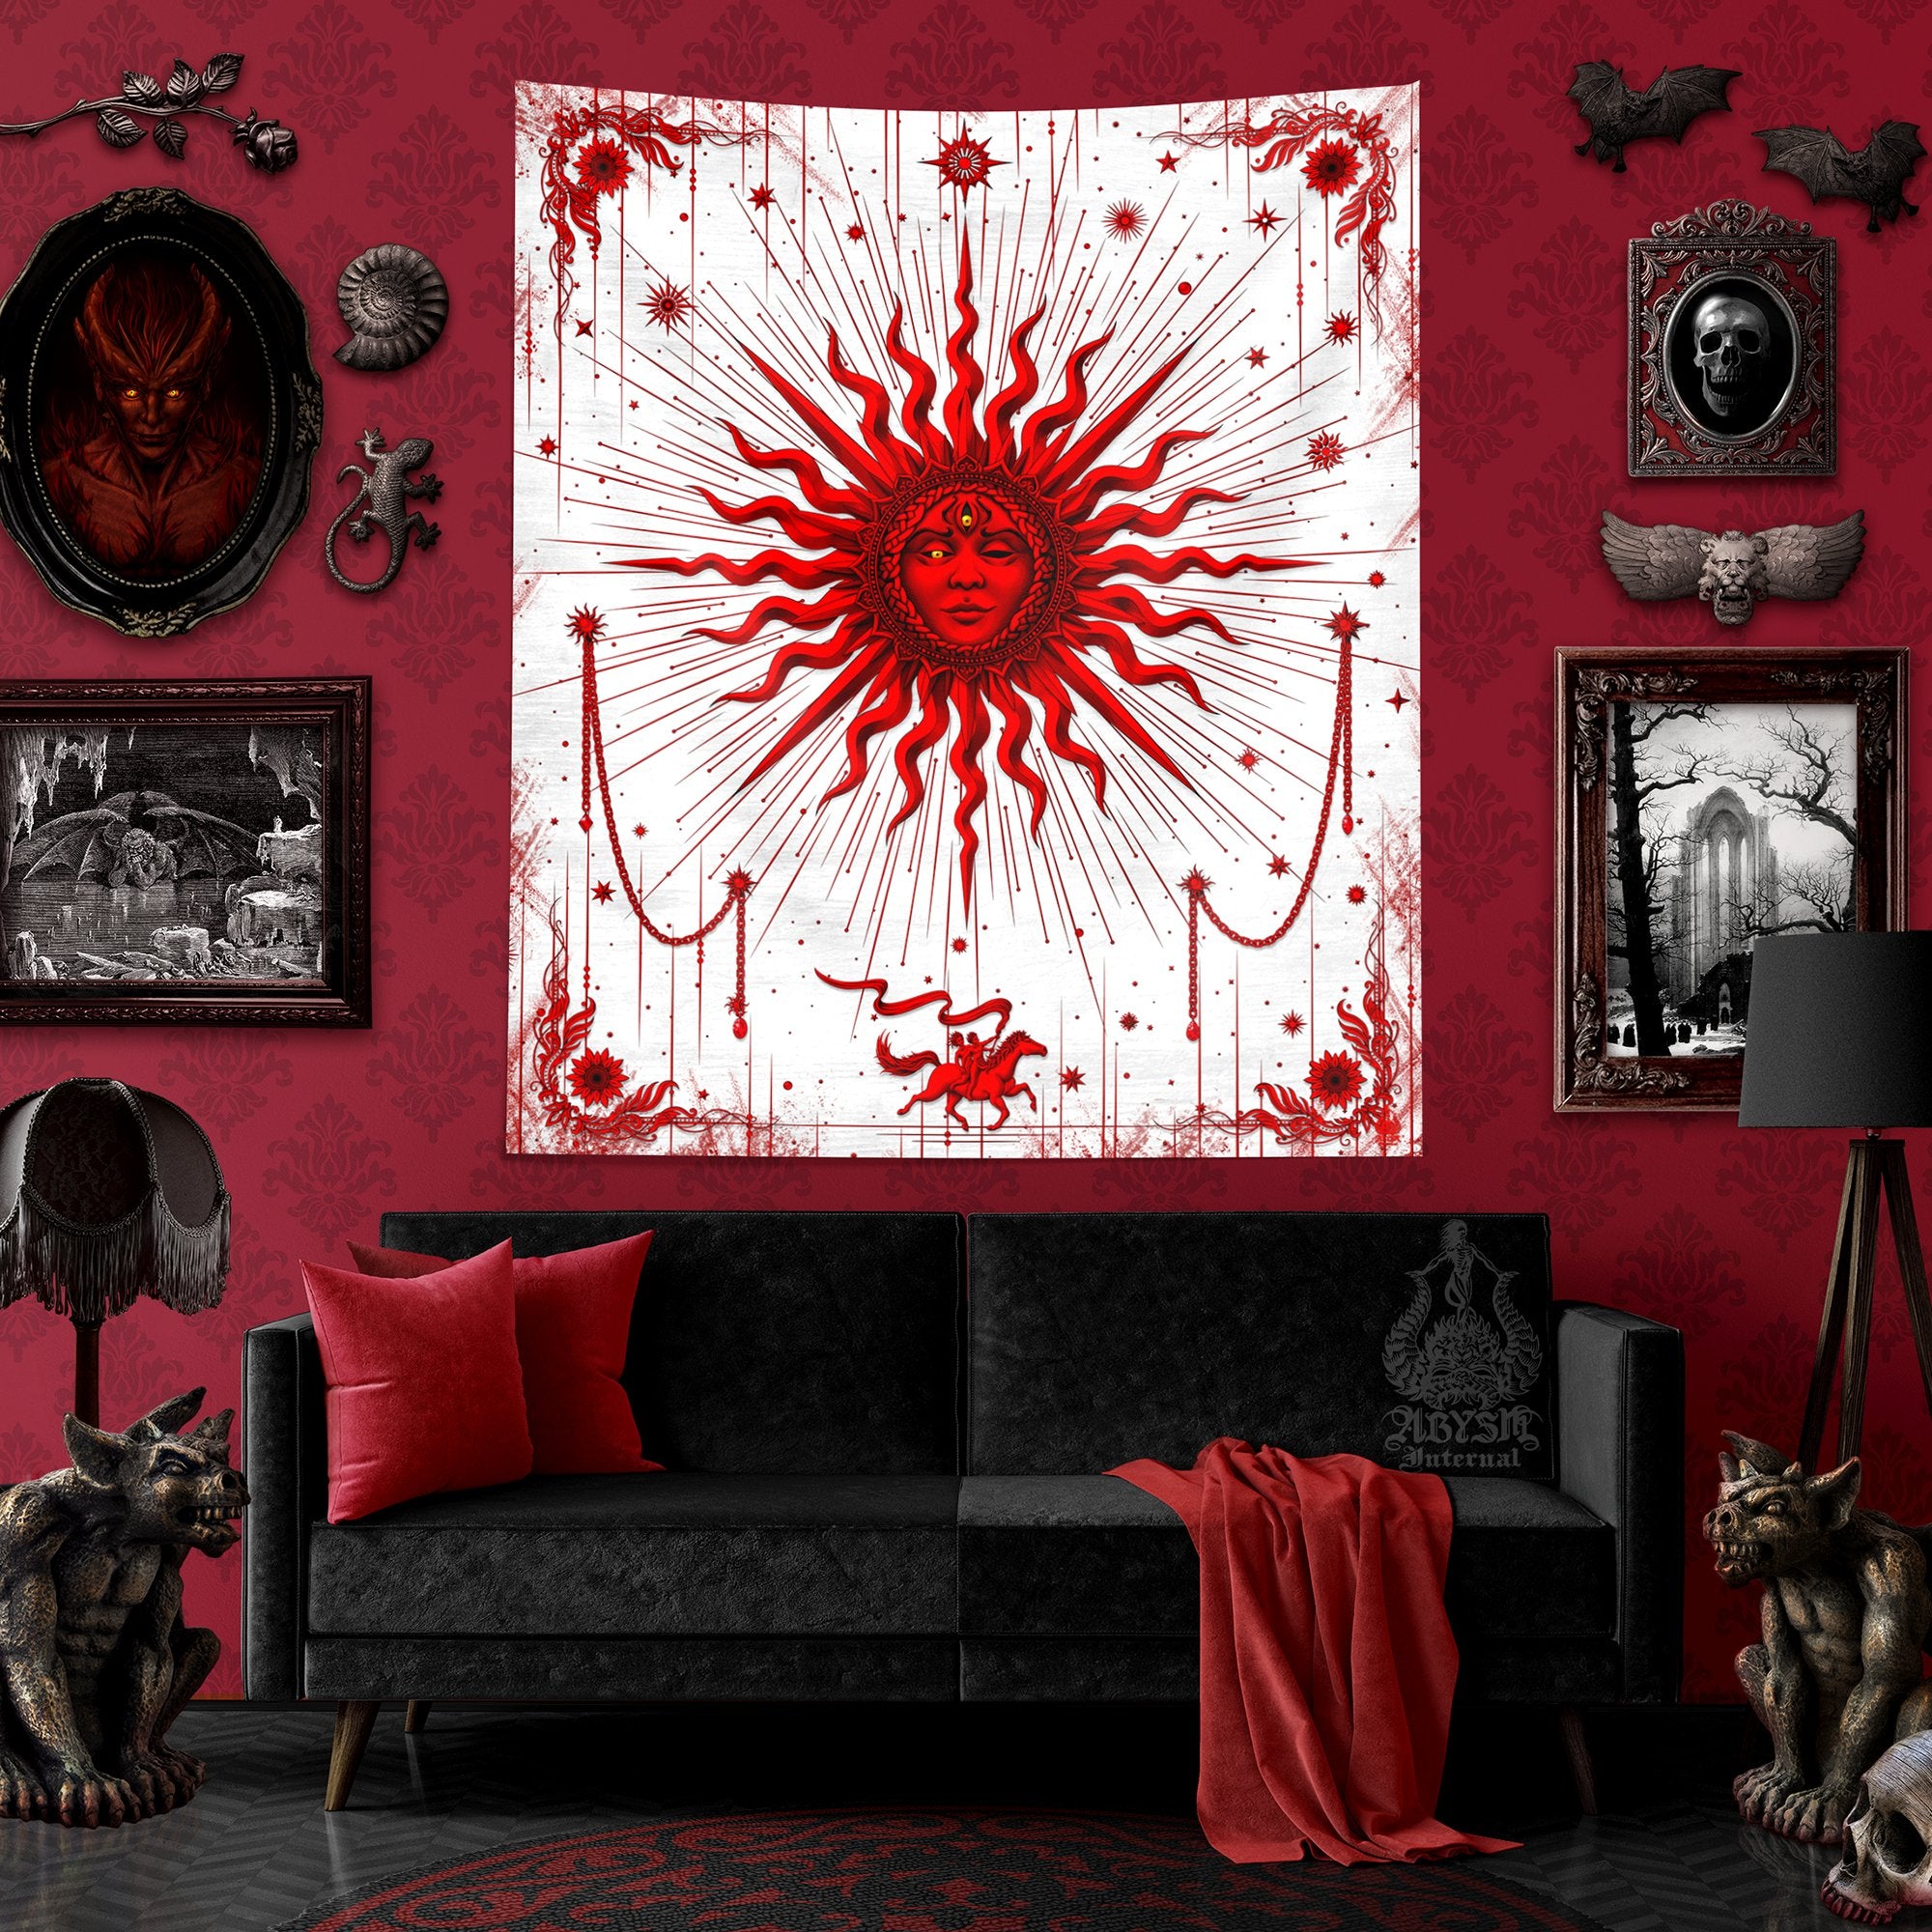 Red Sun Tapestry, Tarot Card Arcana Wall Hanging, White Goth Witchy Home, Gothic Witch's Room Decor, Magic and Esoteric Art, Vertical Print - Abysm Internal